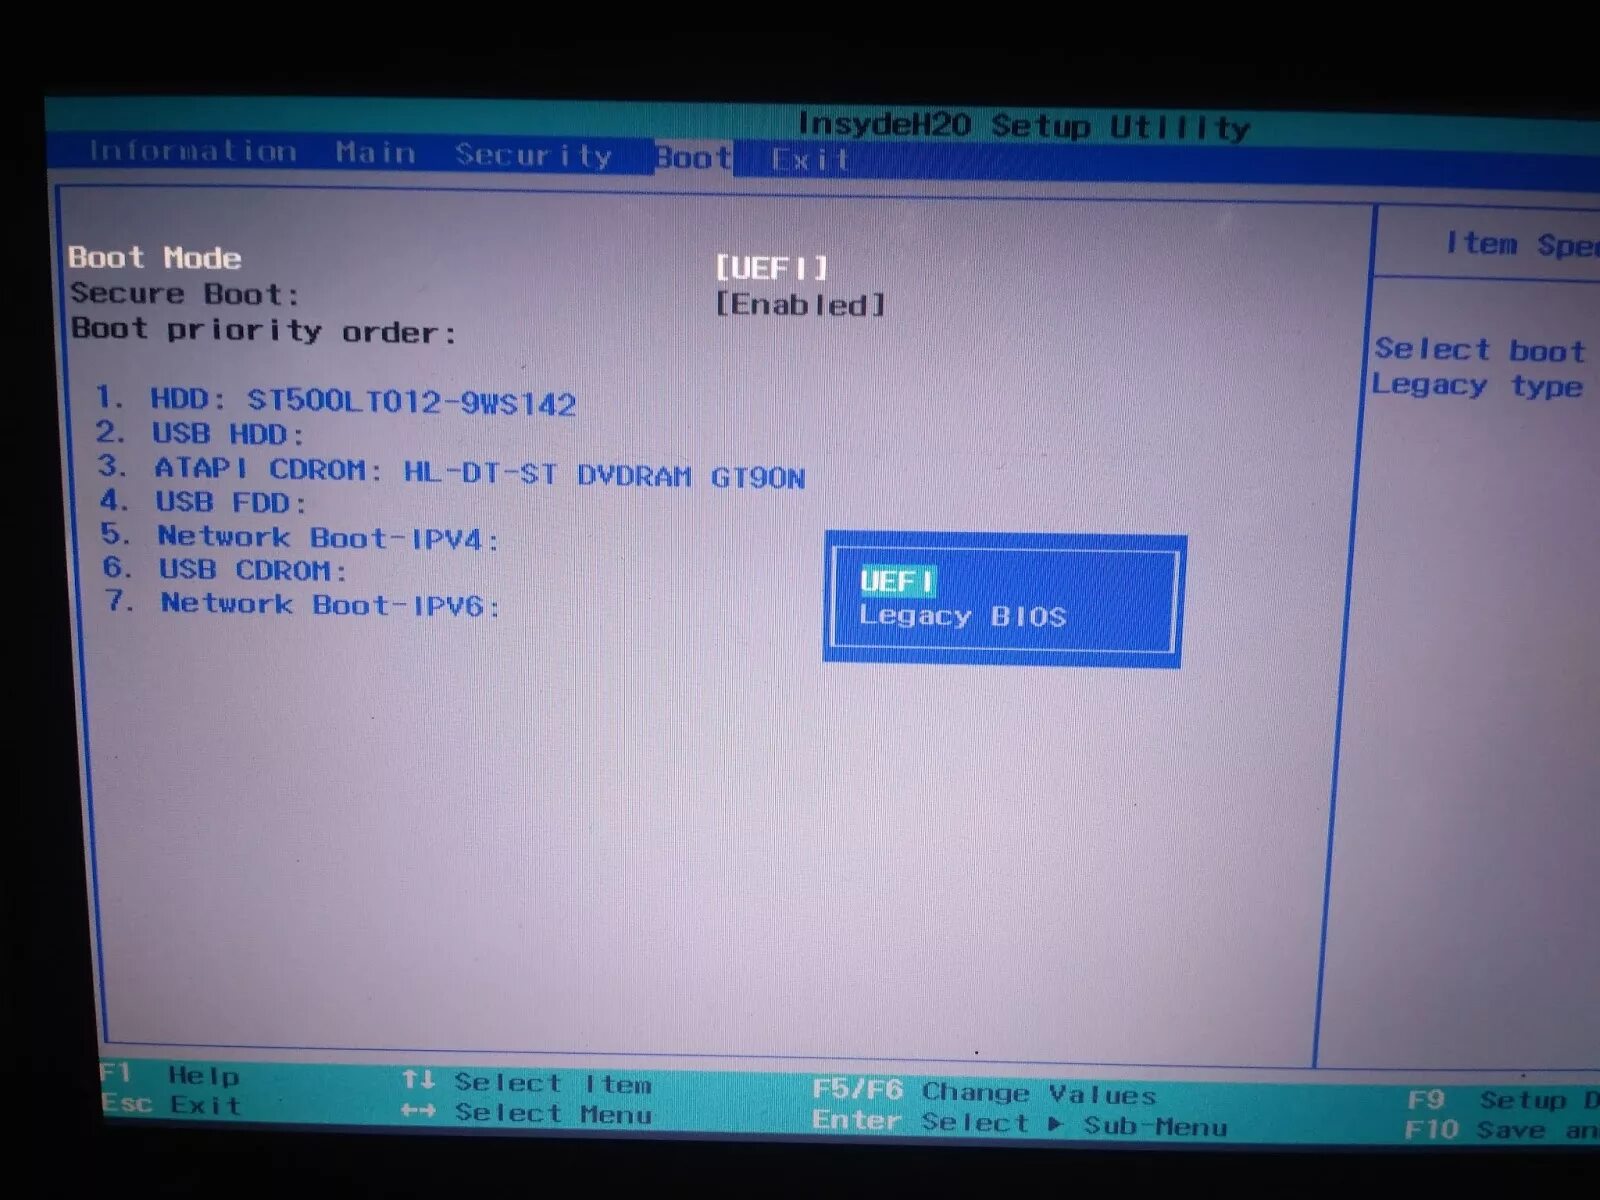 BIOS insydeh20 Hasee. Boot device ноутбук. Insydeh20 сигналы. No Bootable device please restart System на ноутбуке. No bootable system